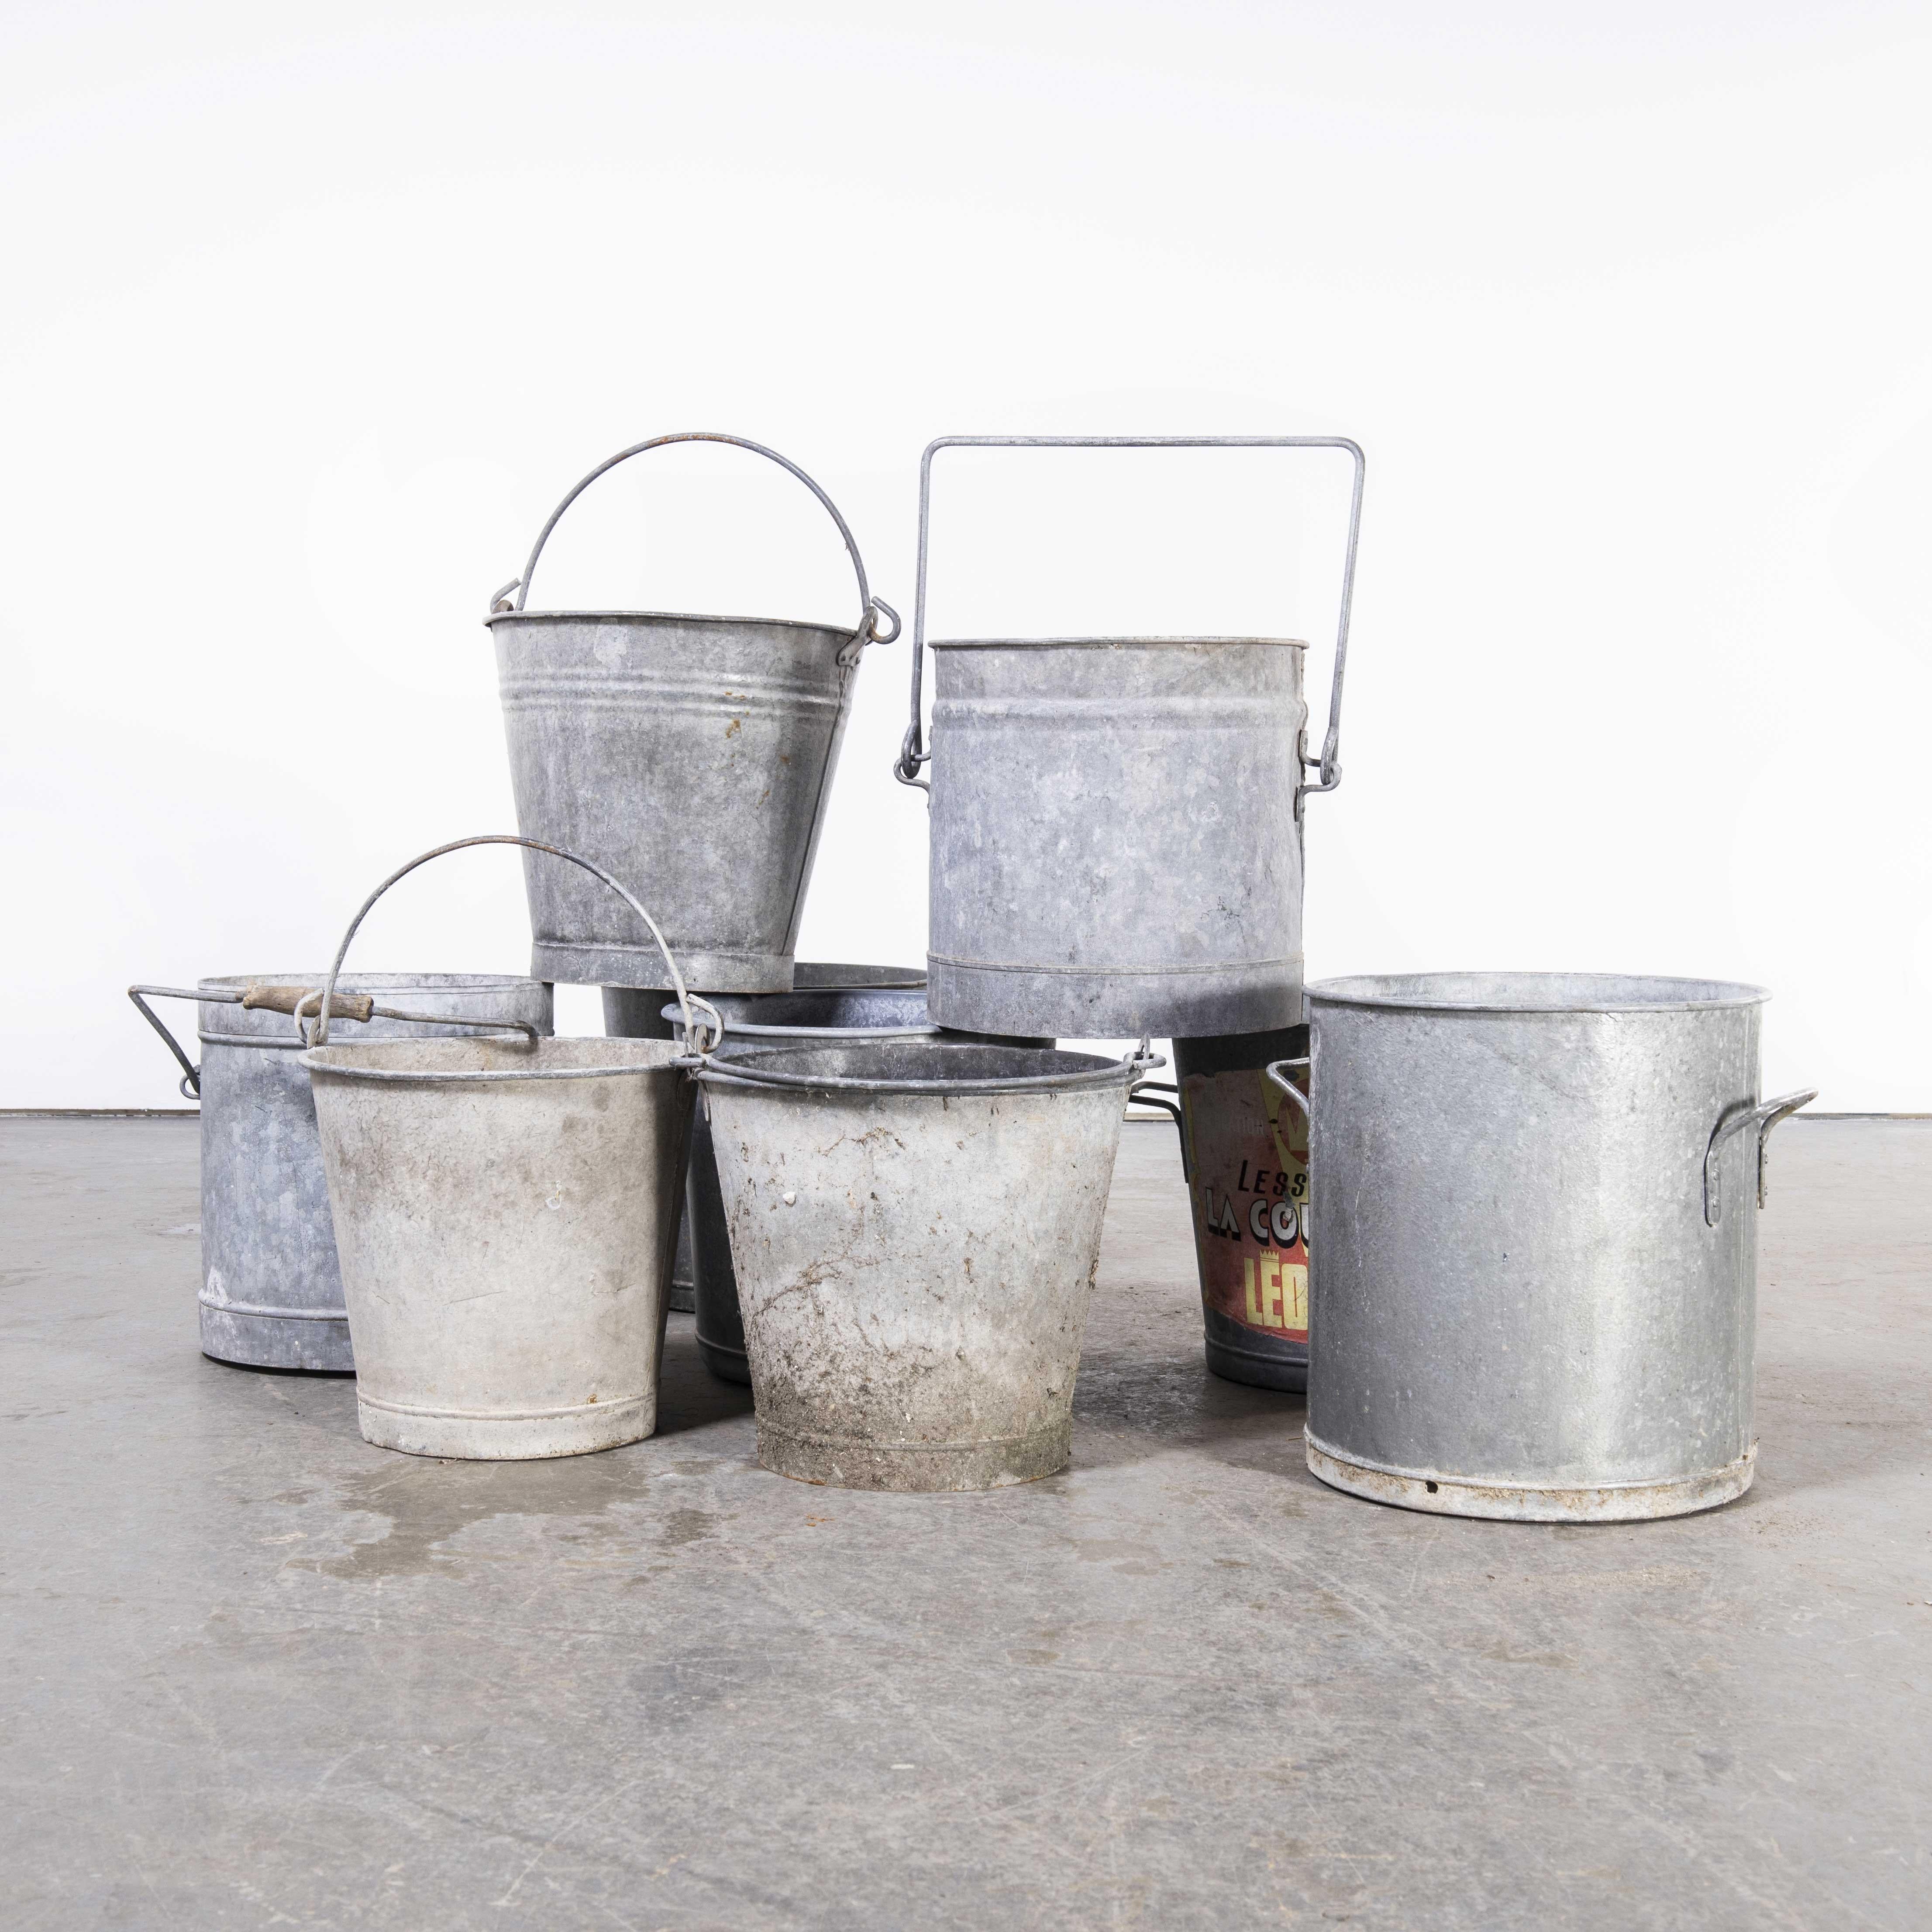 Medium French Galvansied buckets – planters
Medium French Galvansied buckets – planters. Listing is for one bucket. Sizes vary as shown.

Workshop report
Our workshop team inspect every product and carry out any needed repairs to ensure that